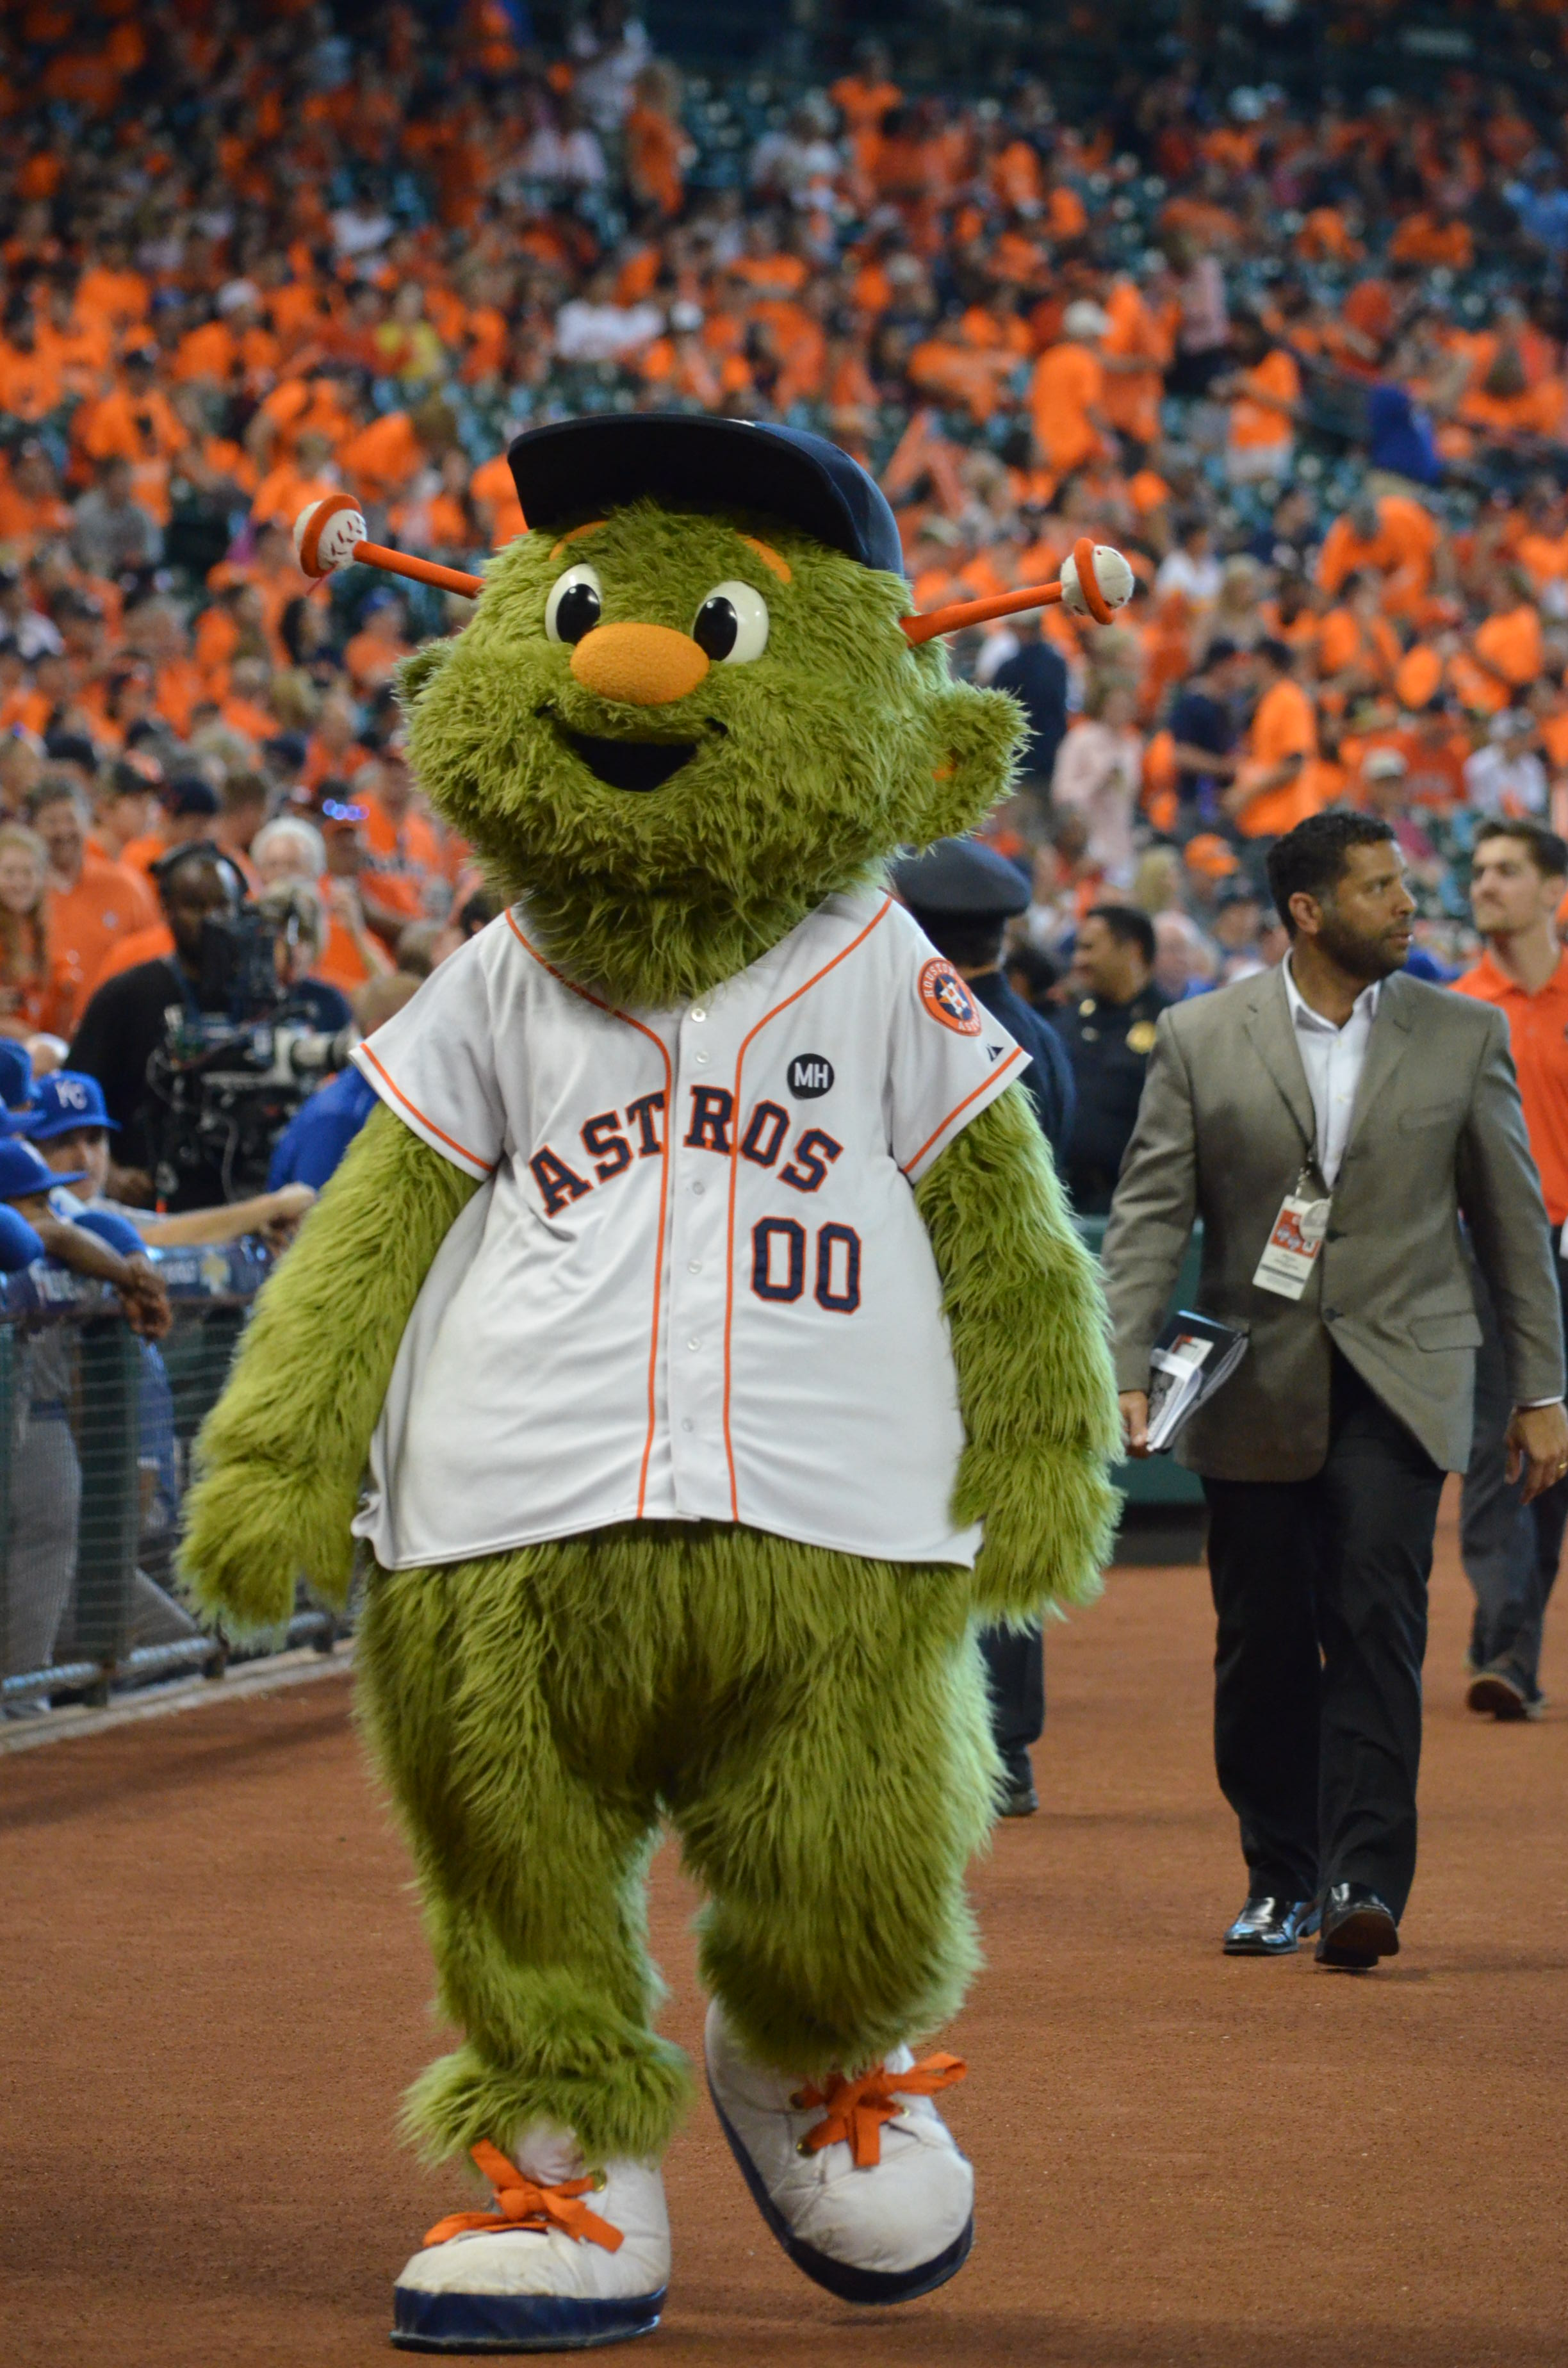 Calling all Astros fans: Orbit has the best work excuse letter for